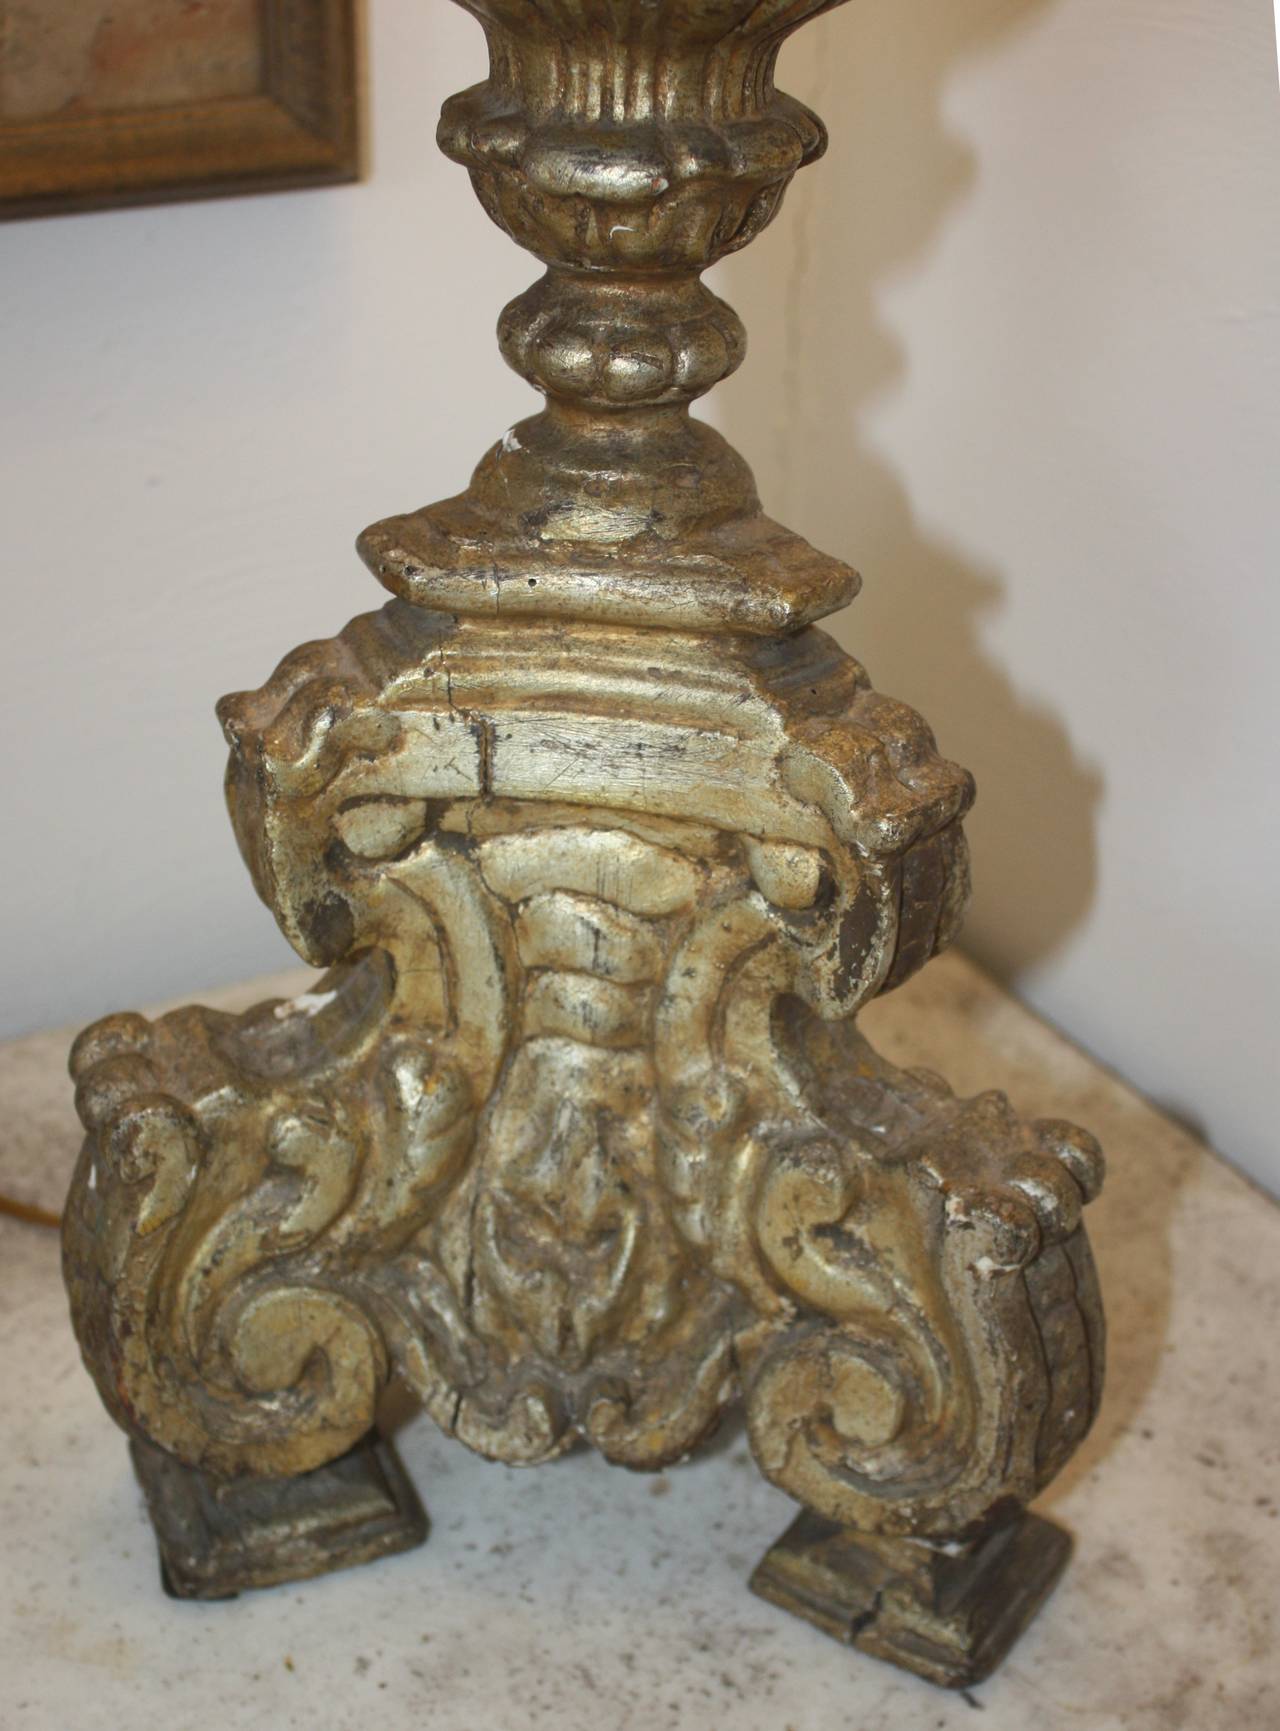 A large-scale Italian silver gilt altar stick, circa 1750, now mounted as an electrified table lamp.